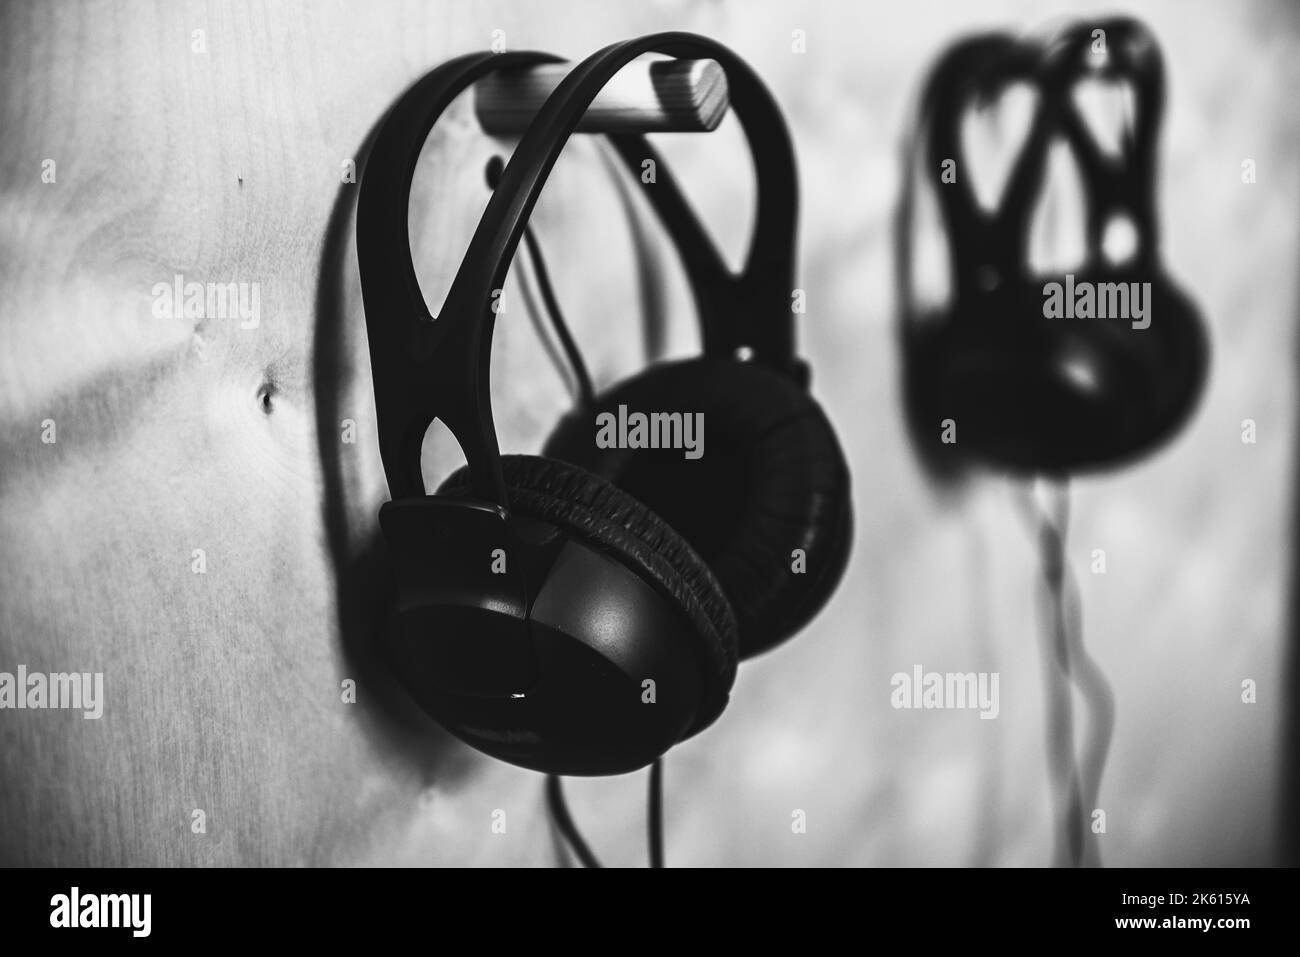 Headphones are hanging on the wall in a music studio. Black and white photography. Stock Photo